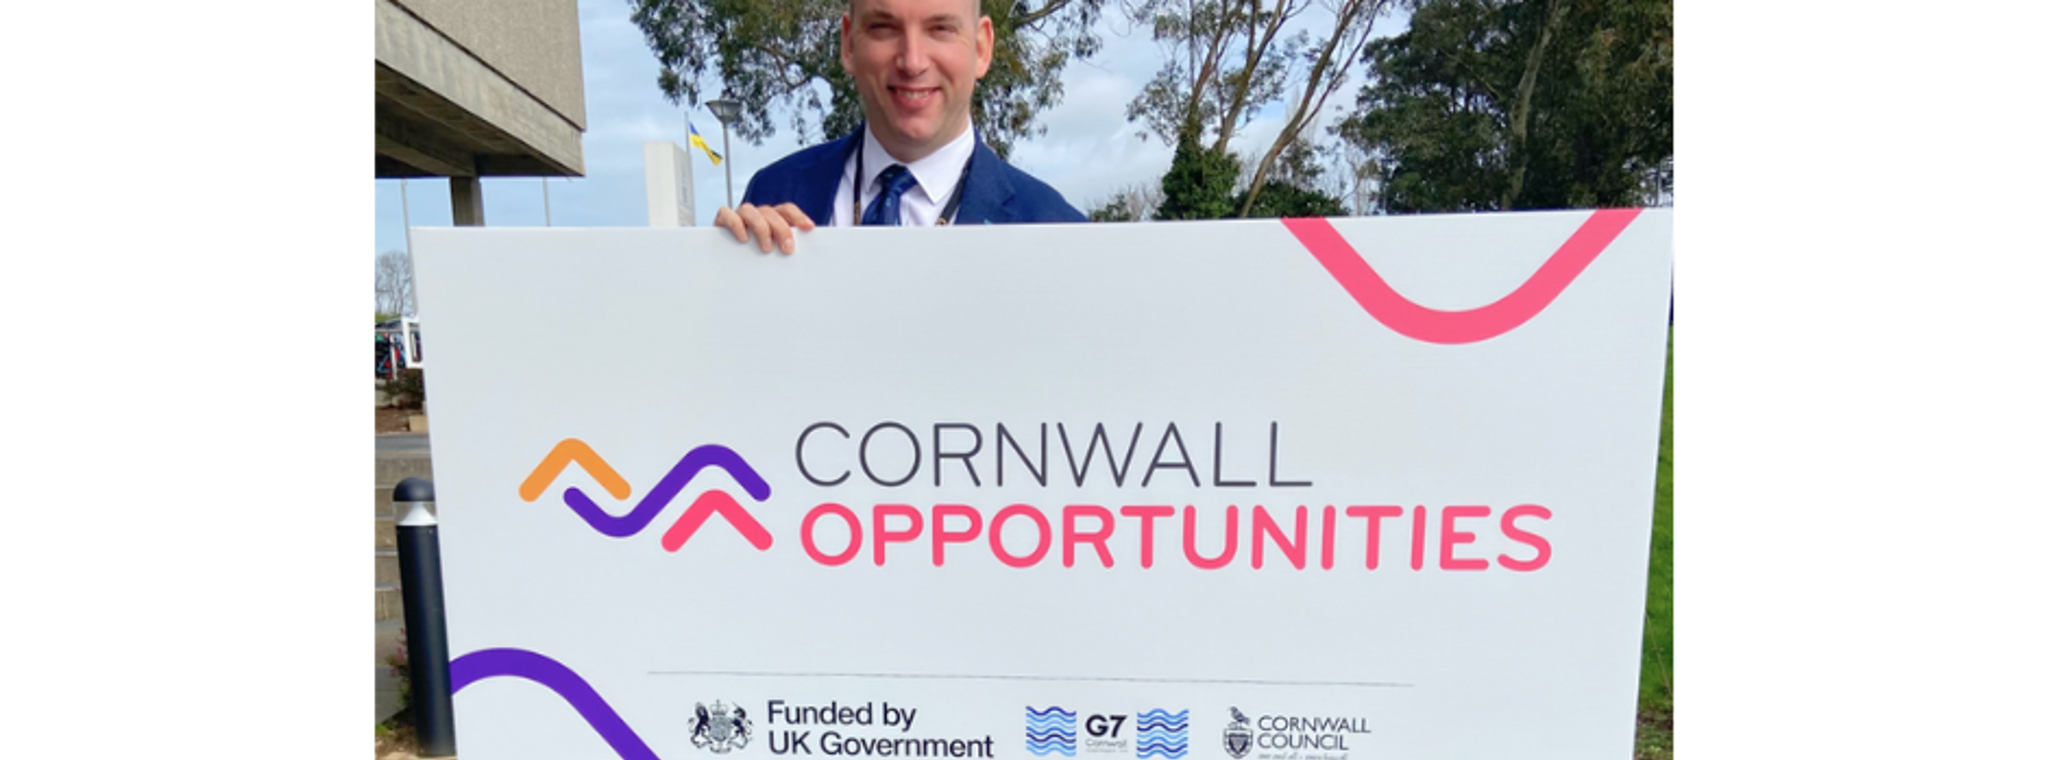 Cllr Louis Gardner pictured holding a Cornwall Opportunities sign